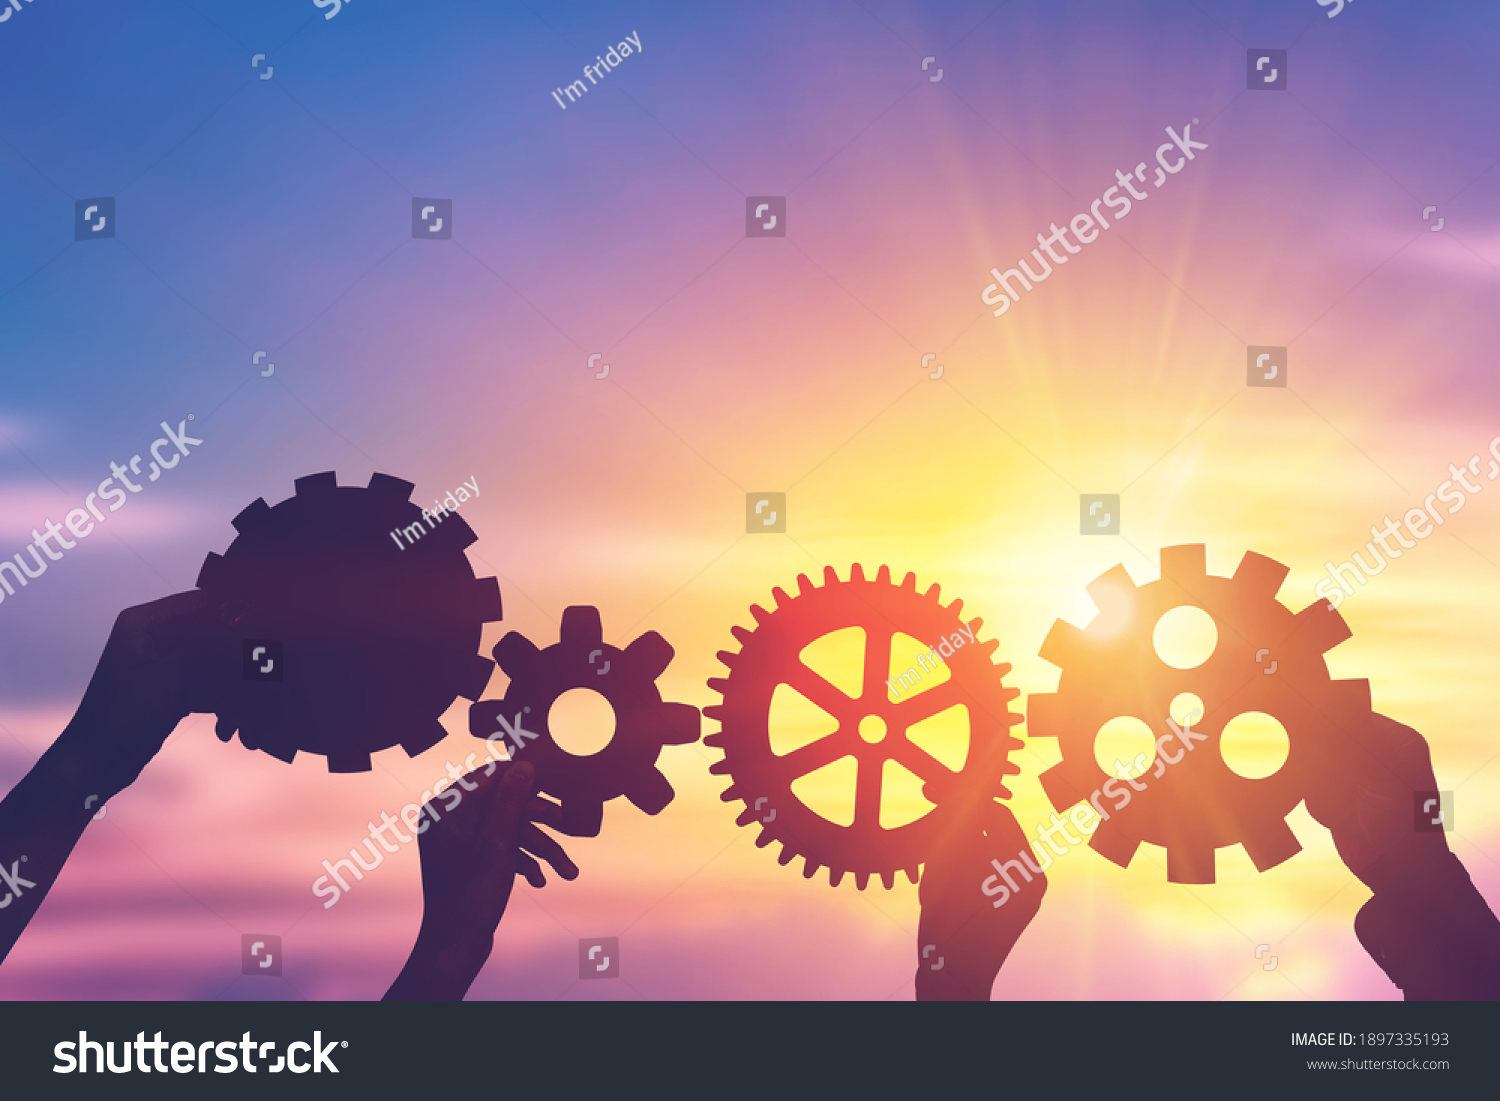 Silhouette hands holding gear from at sunlight background. concept of a teamwork cooperation idea.
 #1897335193